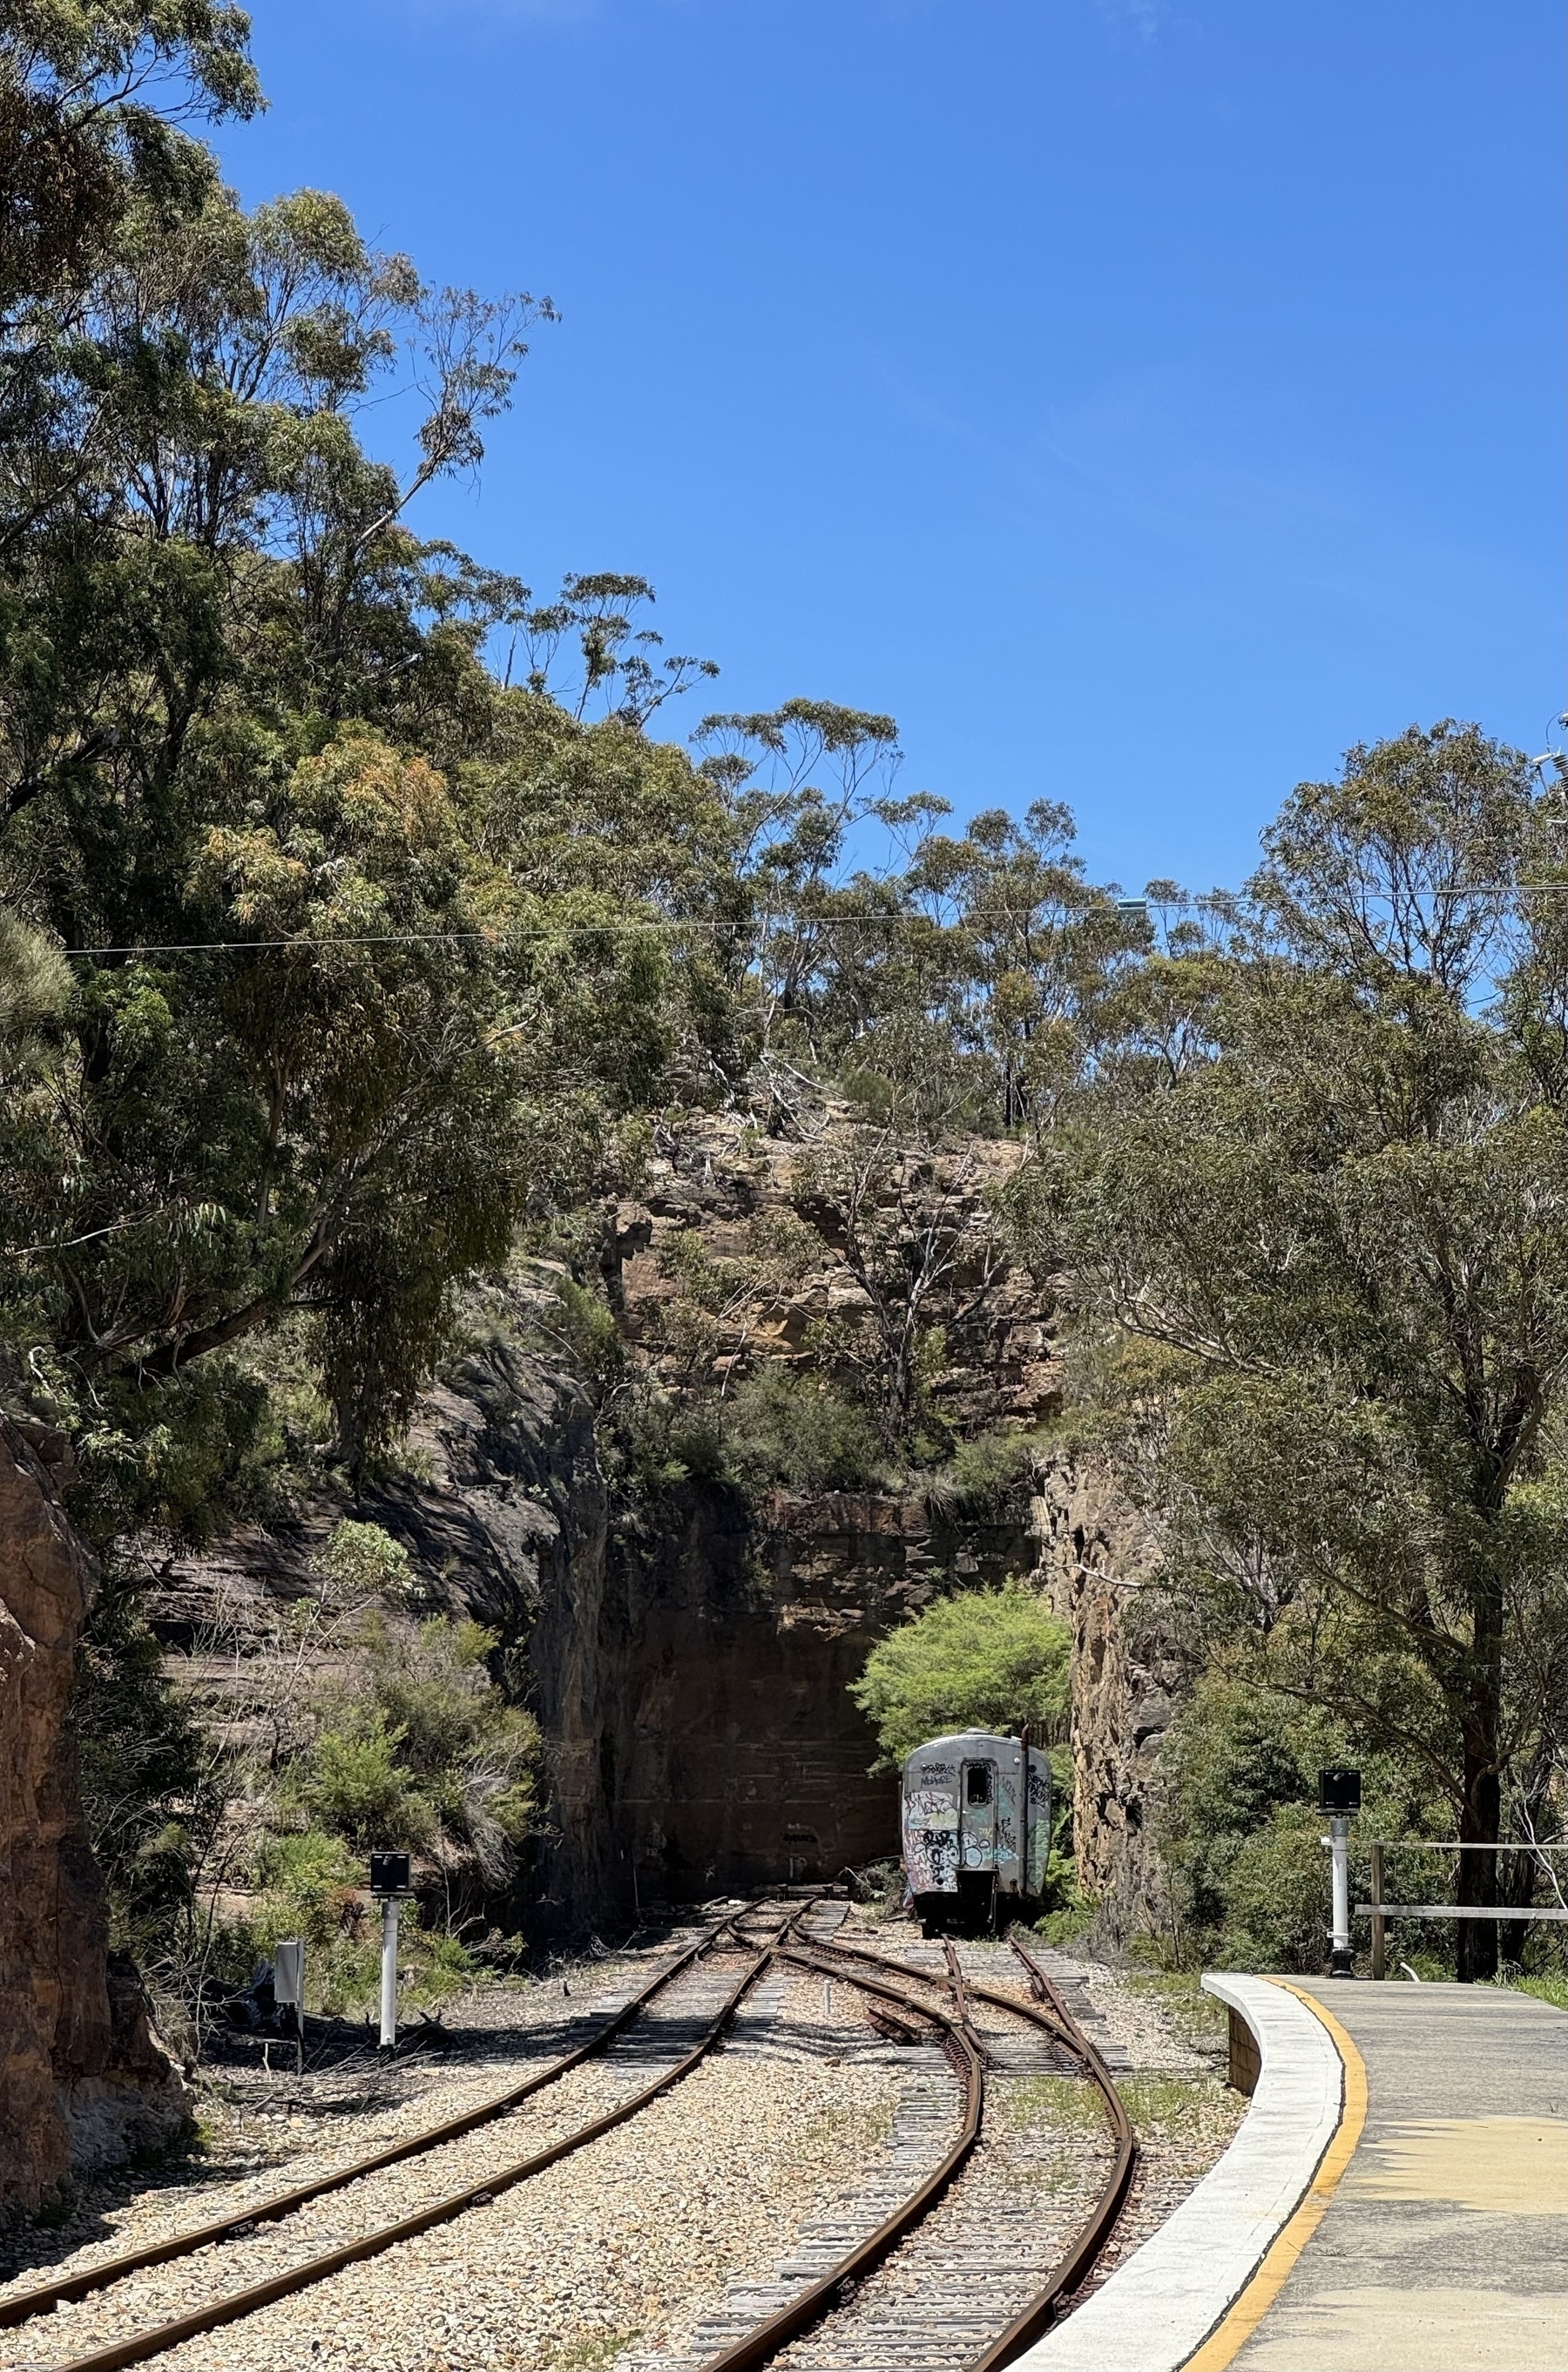 An old train carriage at the end of a train line that finishes by a rock face.